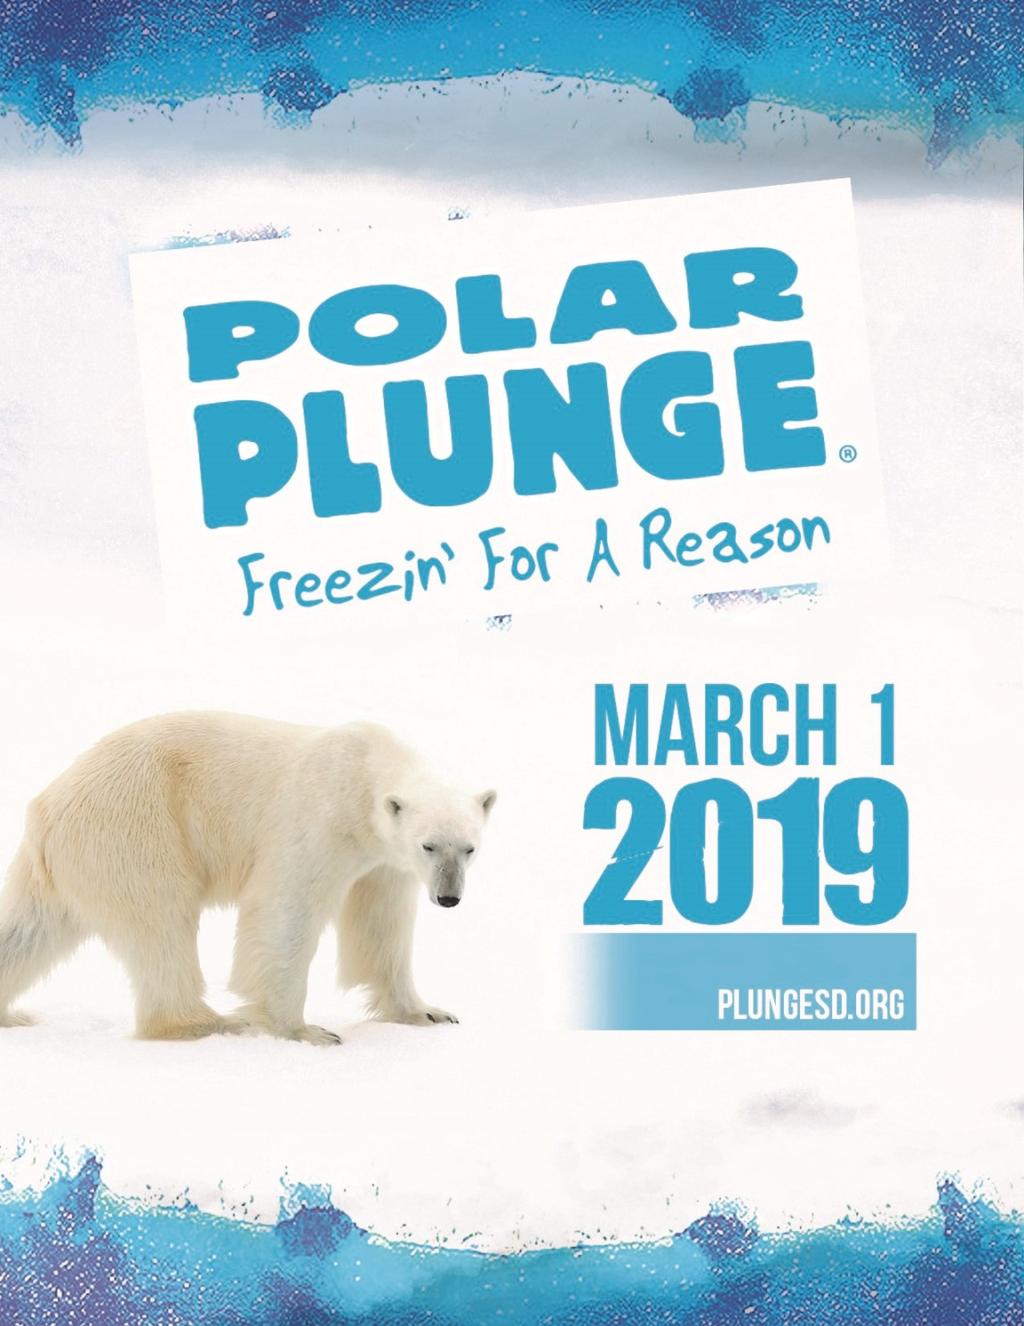 All-in-One Plunger & Team Toolkit February 23 Vermillion February 24 Northern Hills March 1 Watertown March 9 Brandon March 22 Mitchell March 30 Brookings * April